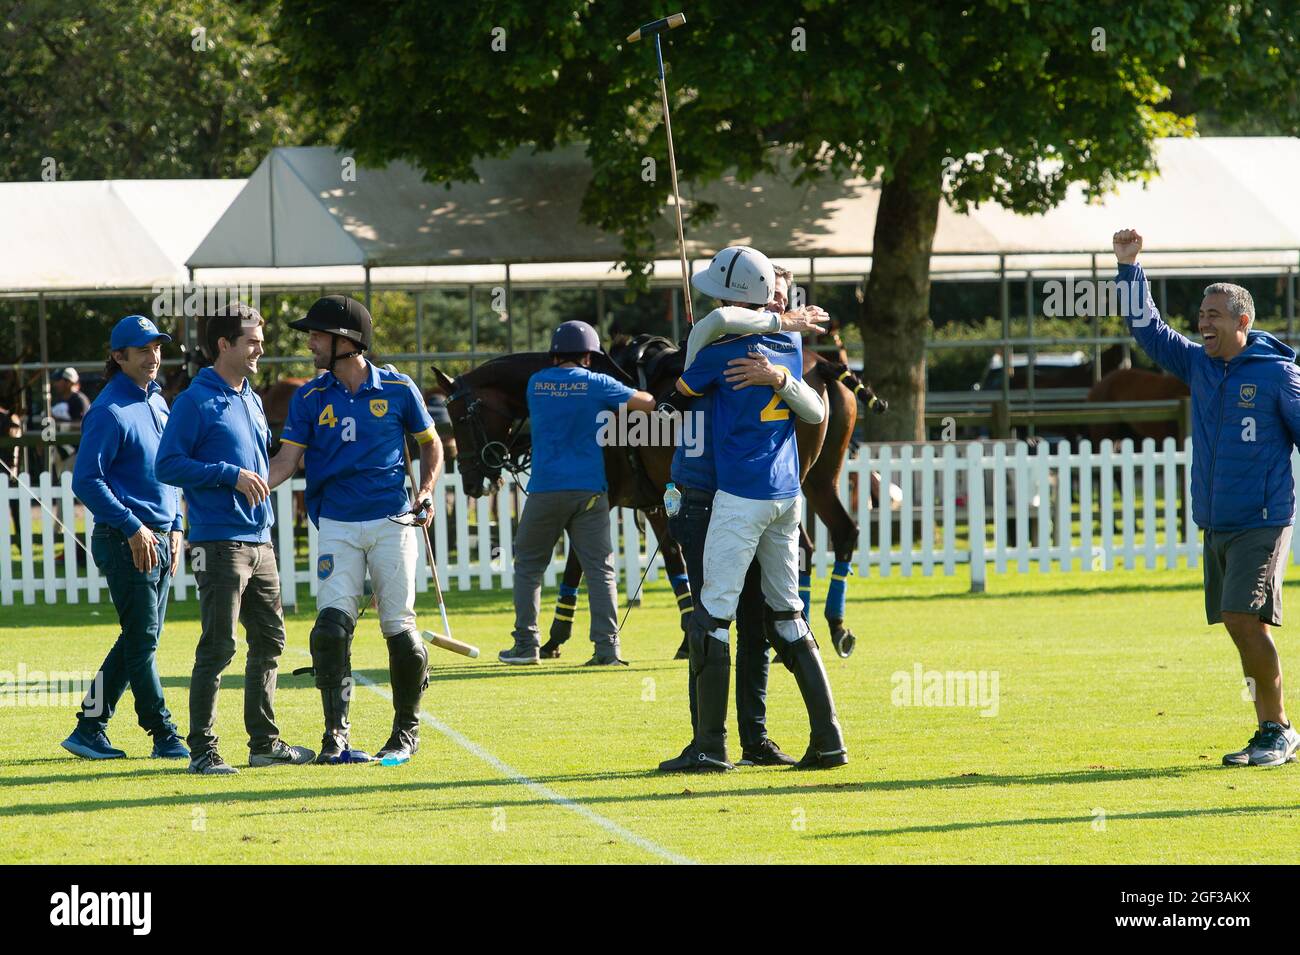 Egham, Surrey, UK. 22nd August, 2021. Park Place polo players were delighted to win the Prince of Wales's Championship Cup. Credit: Maureen McLean/Alamy Stock Photo